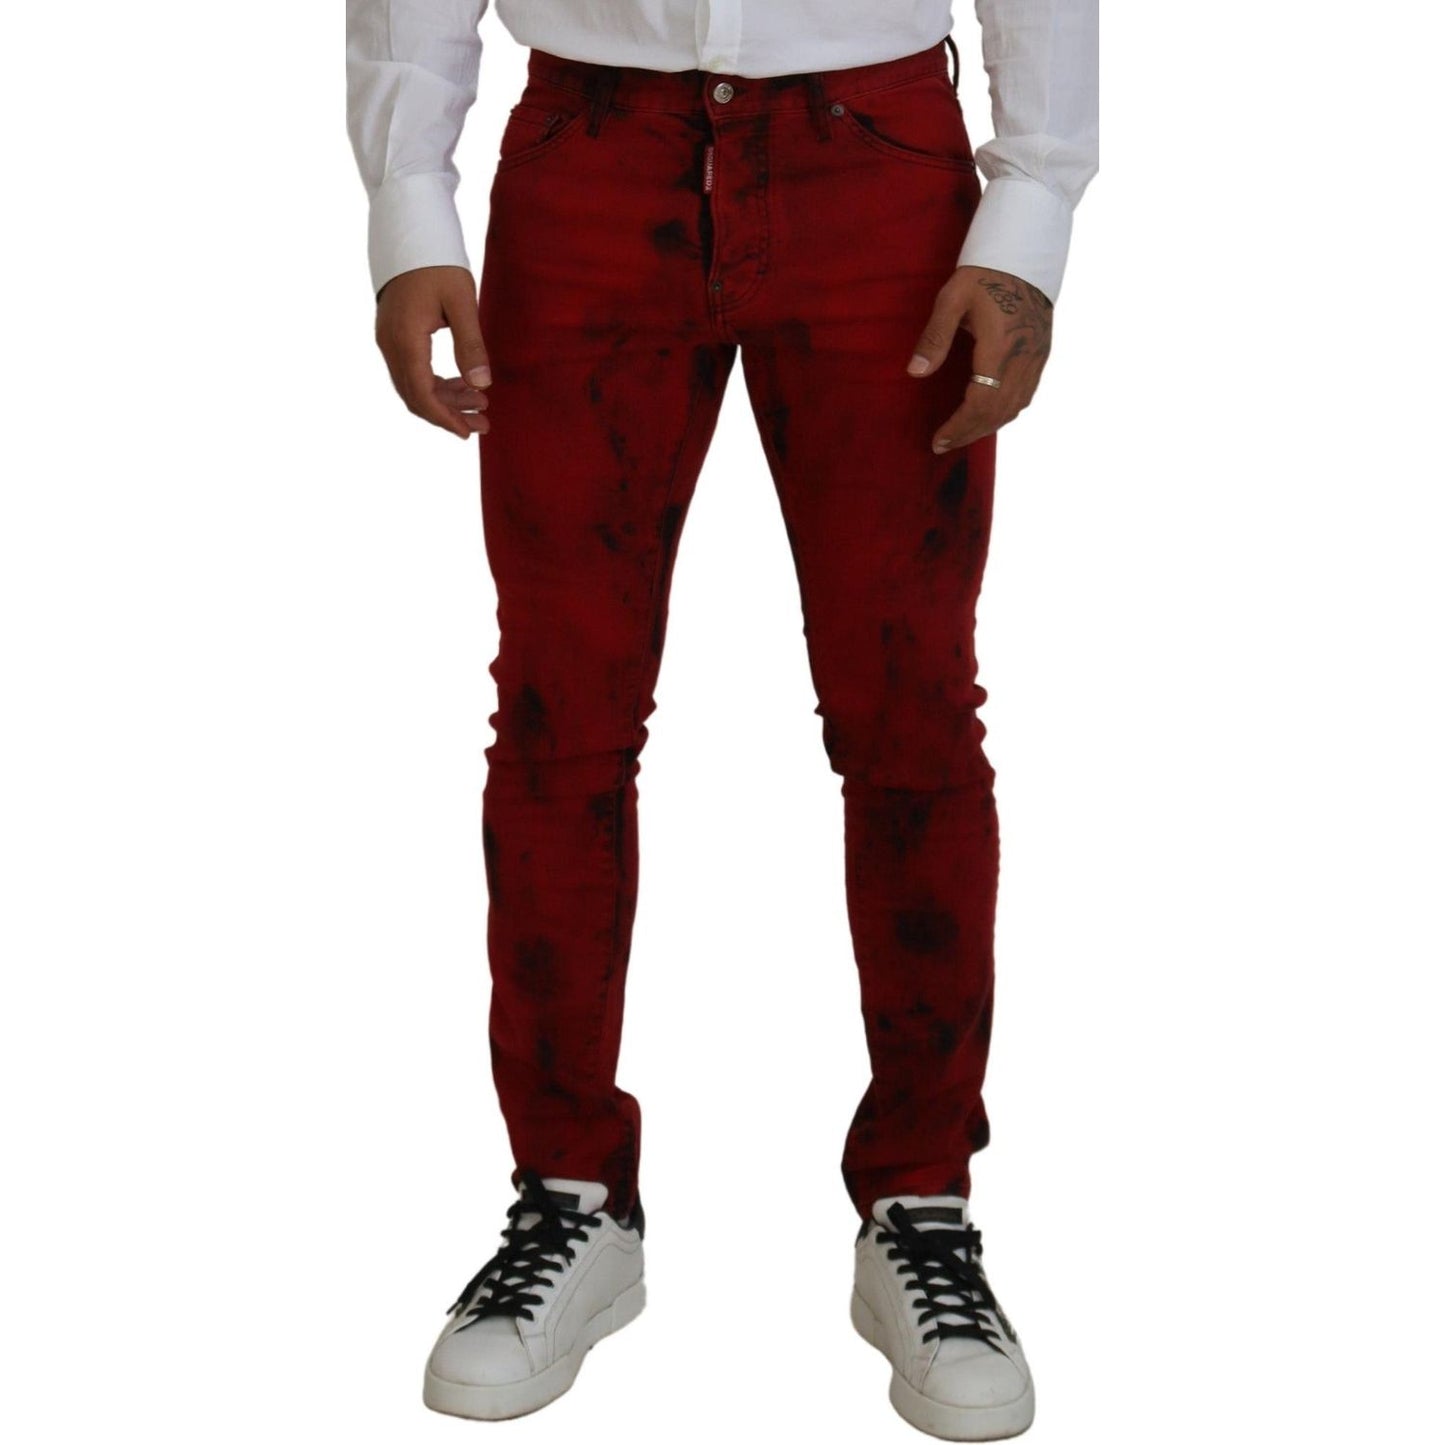 Dsquared² Red Cotton Tie Dye Skinny Casual Men Denim Jeans red-cotton-tie-dye-skinny-casual-men-denim-jeans